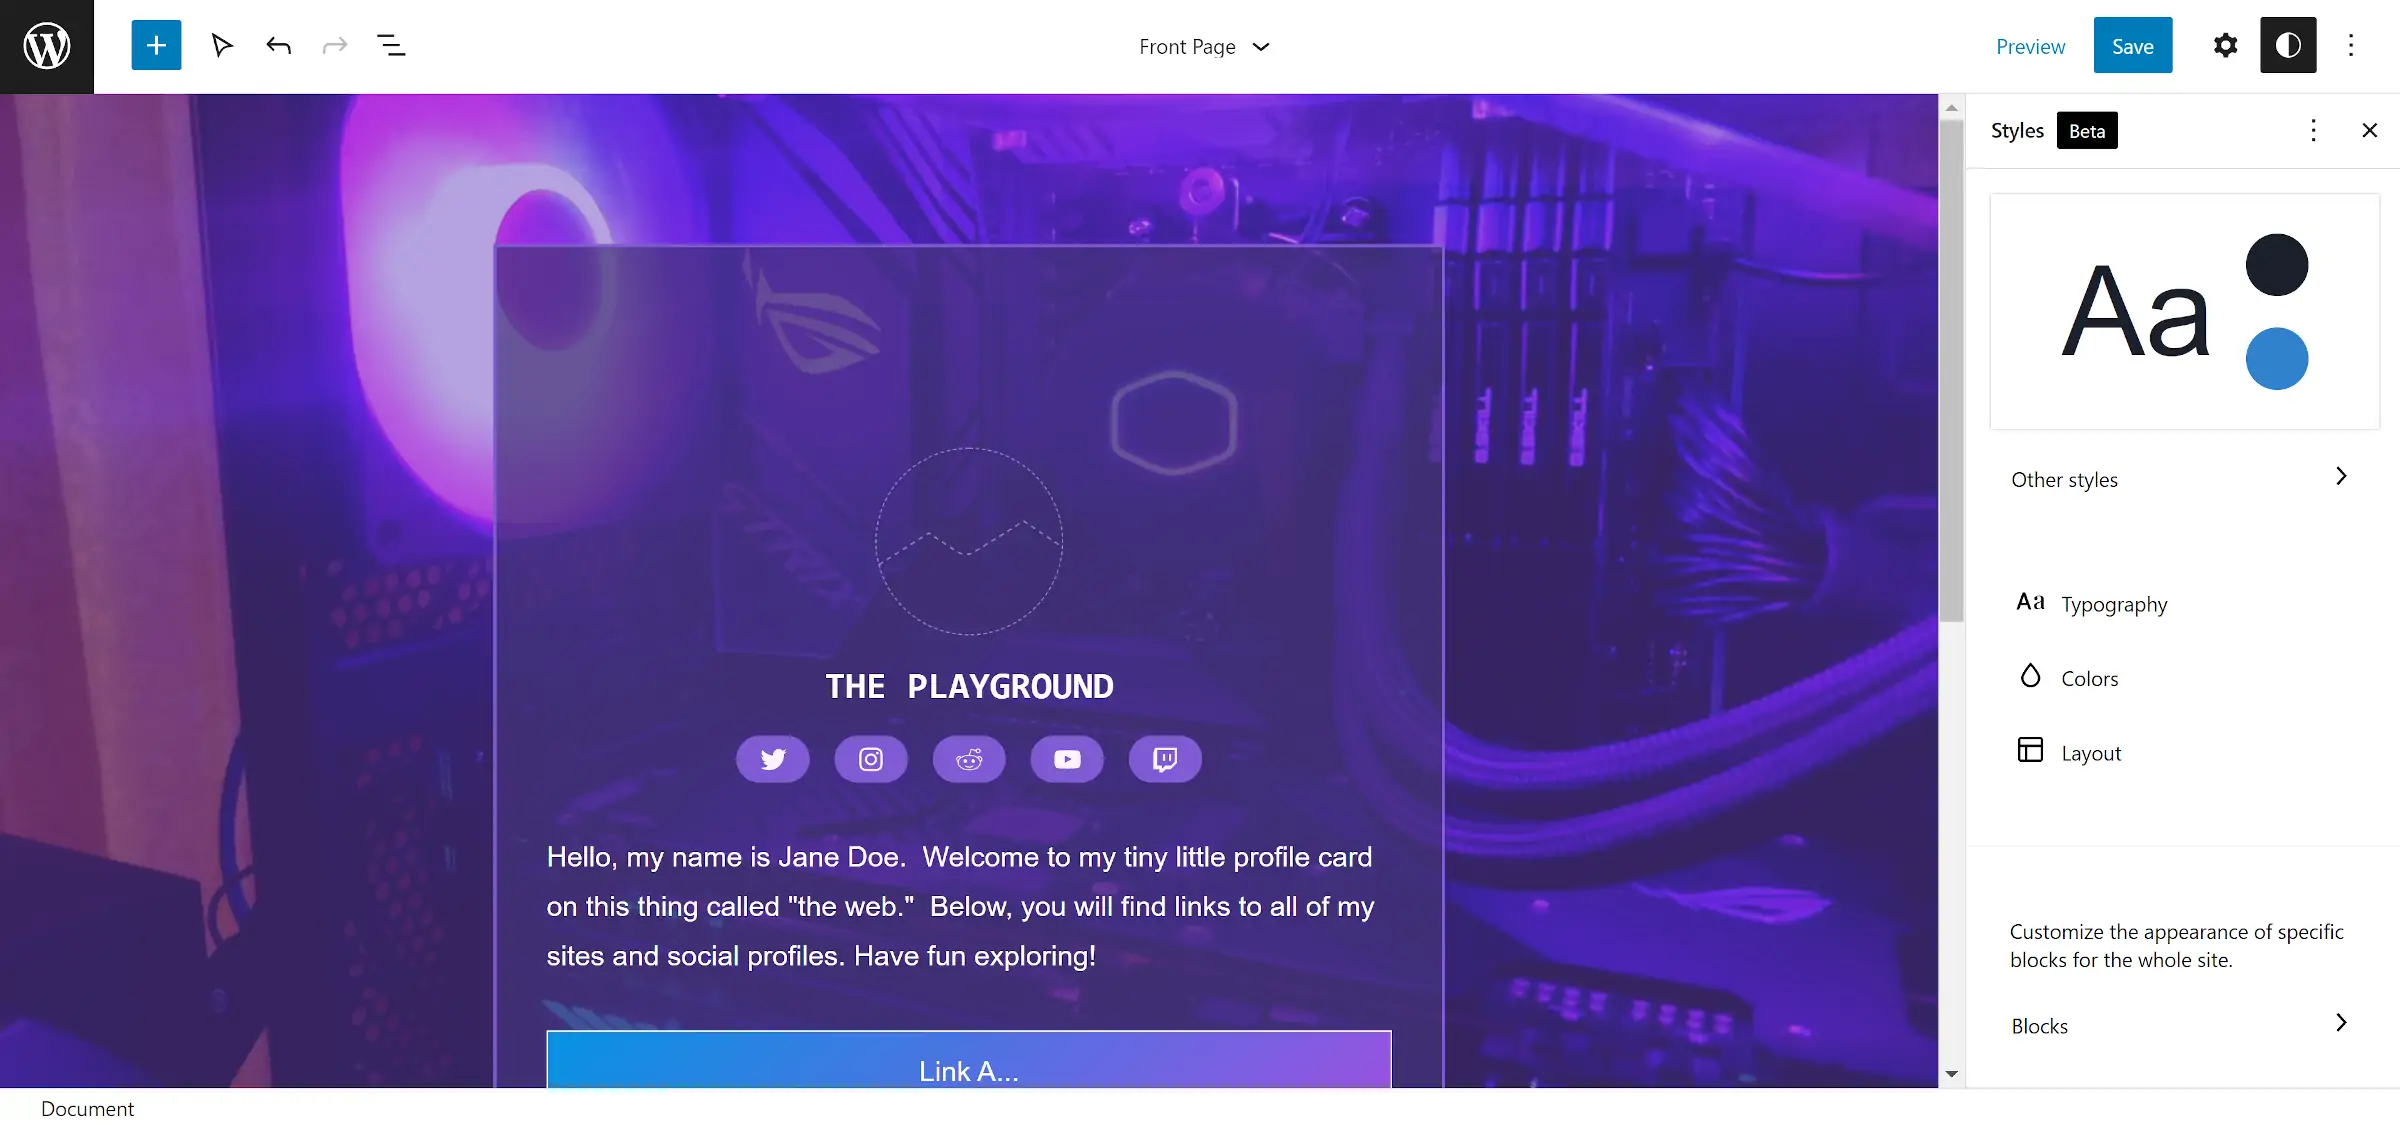 WordPress site editor showing the front page of a site that is designed with purple color scheme.  On the right the global styles interface is open.